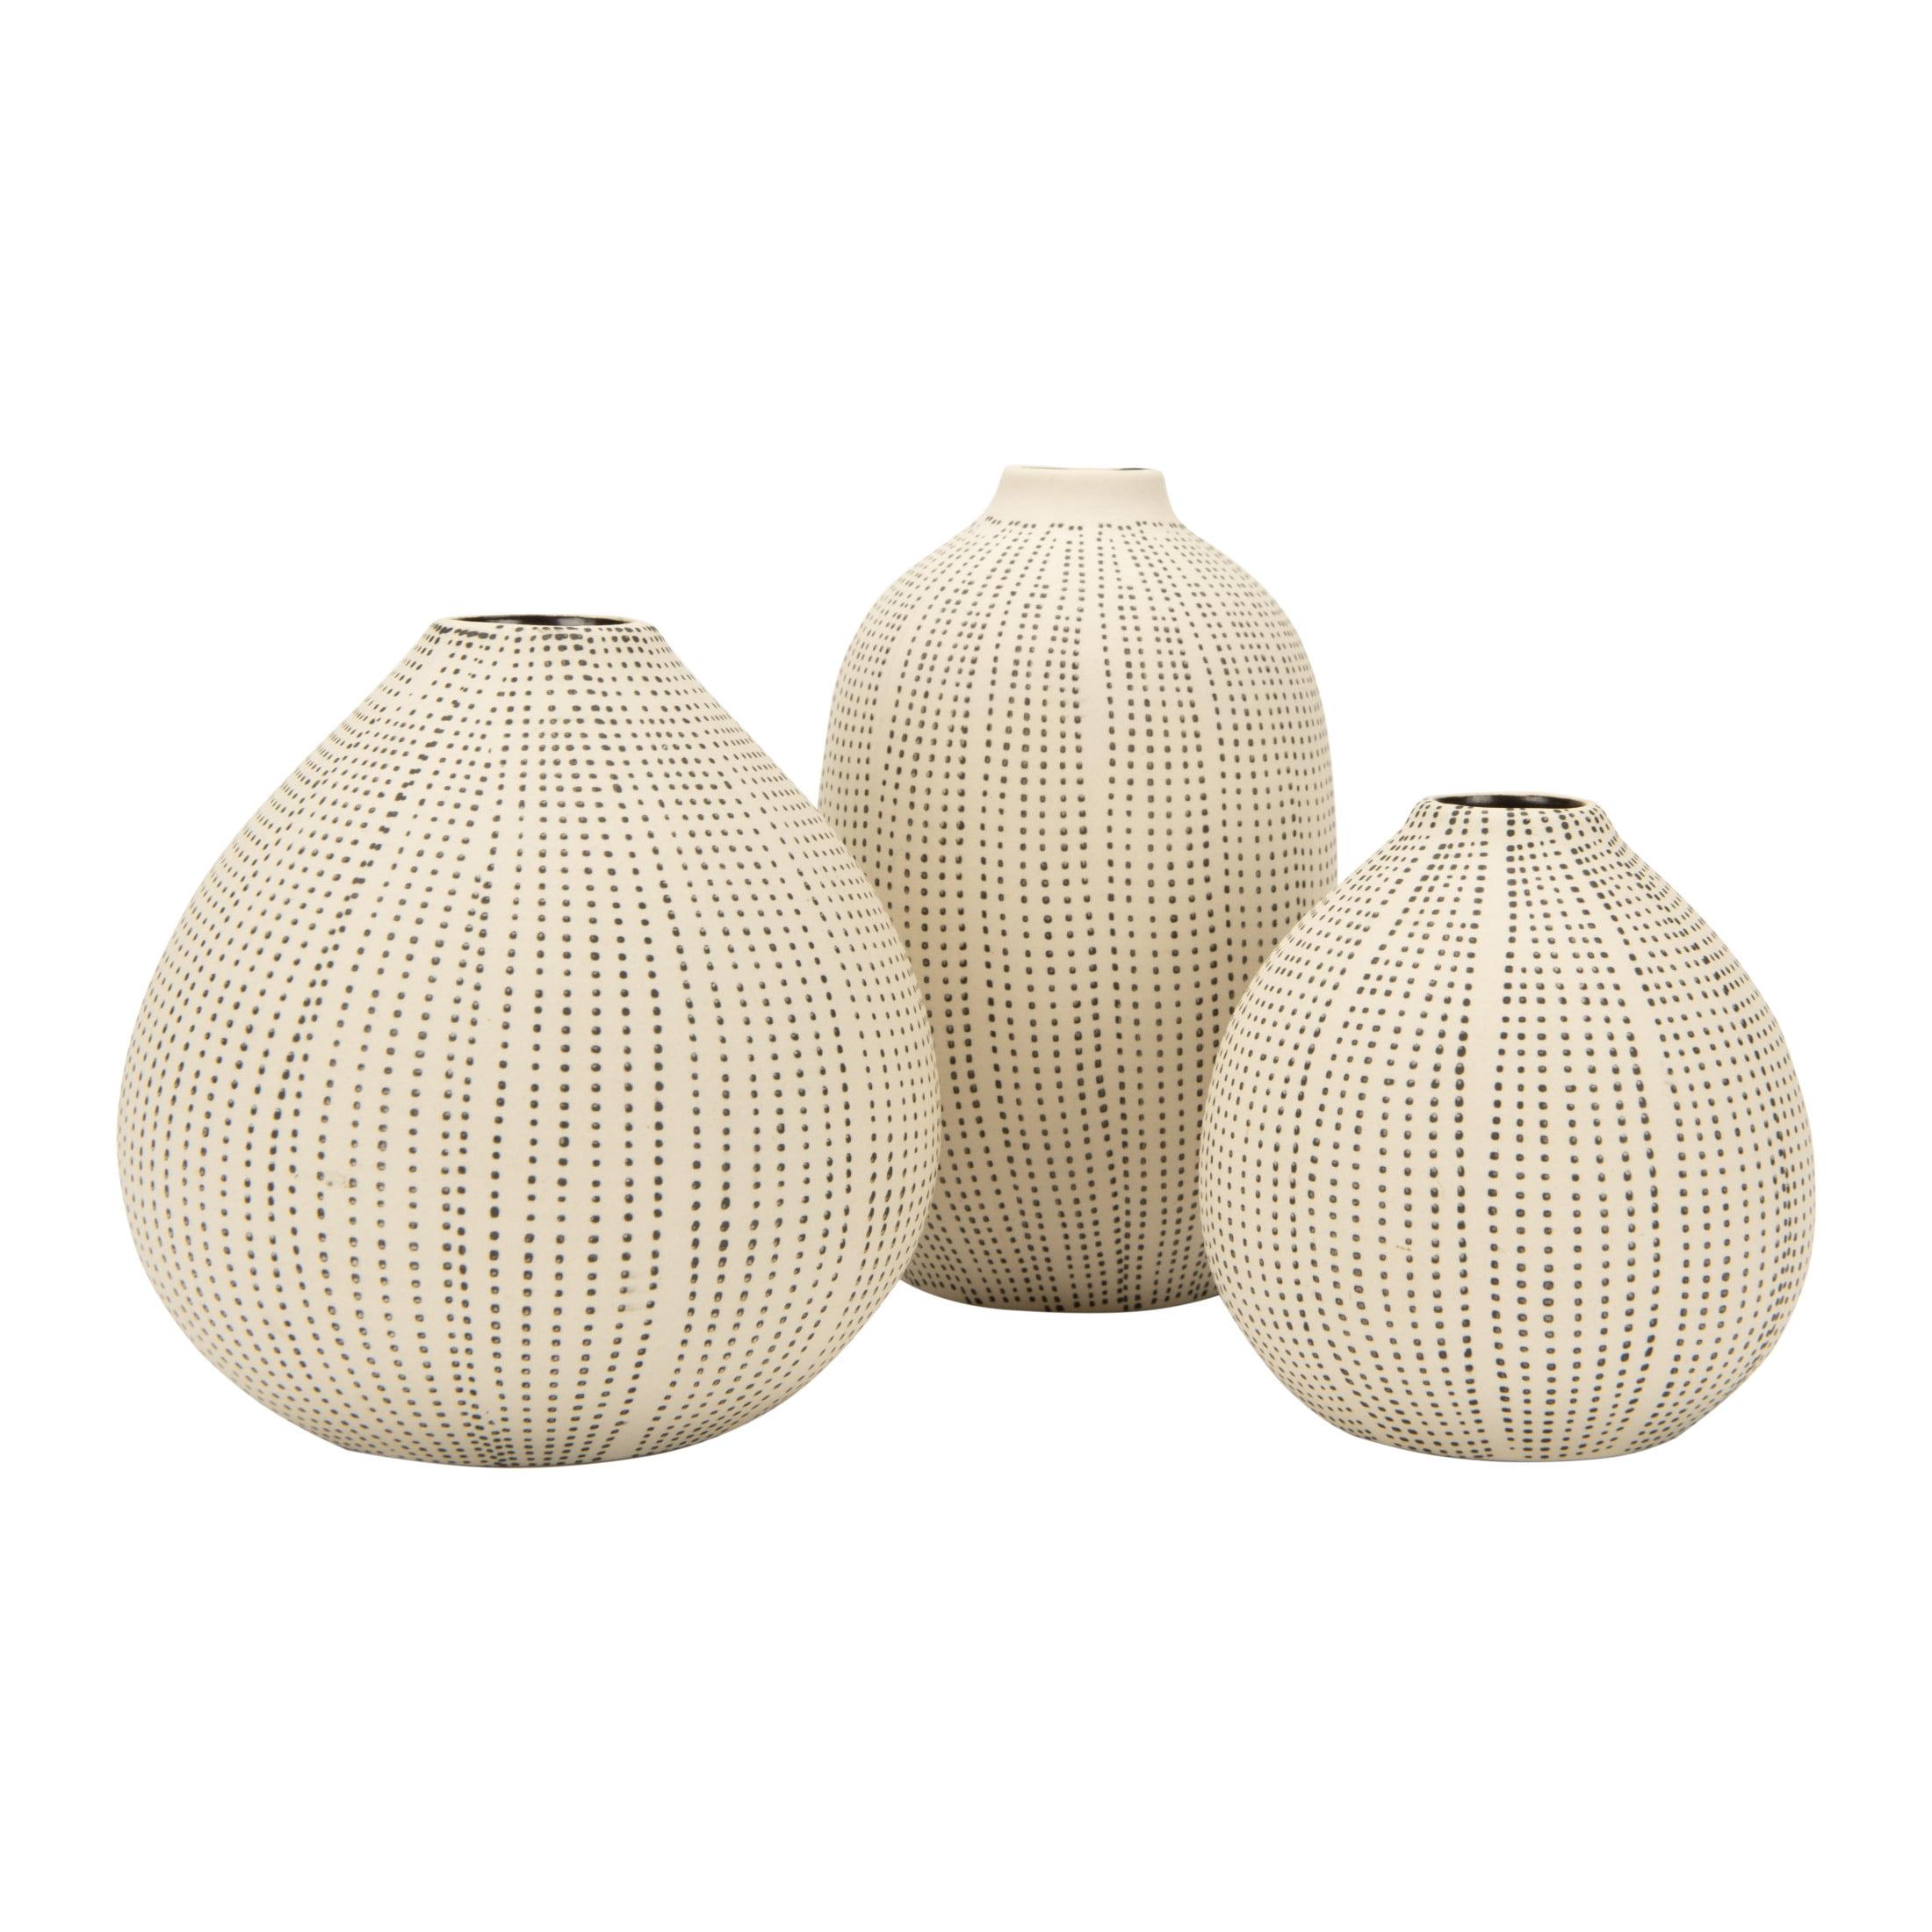 Chic White Ceramic Bouquet Vases with Textured Black Dots (Set of 3)